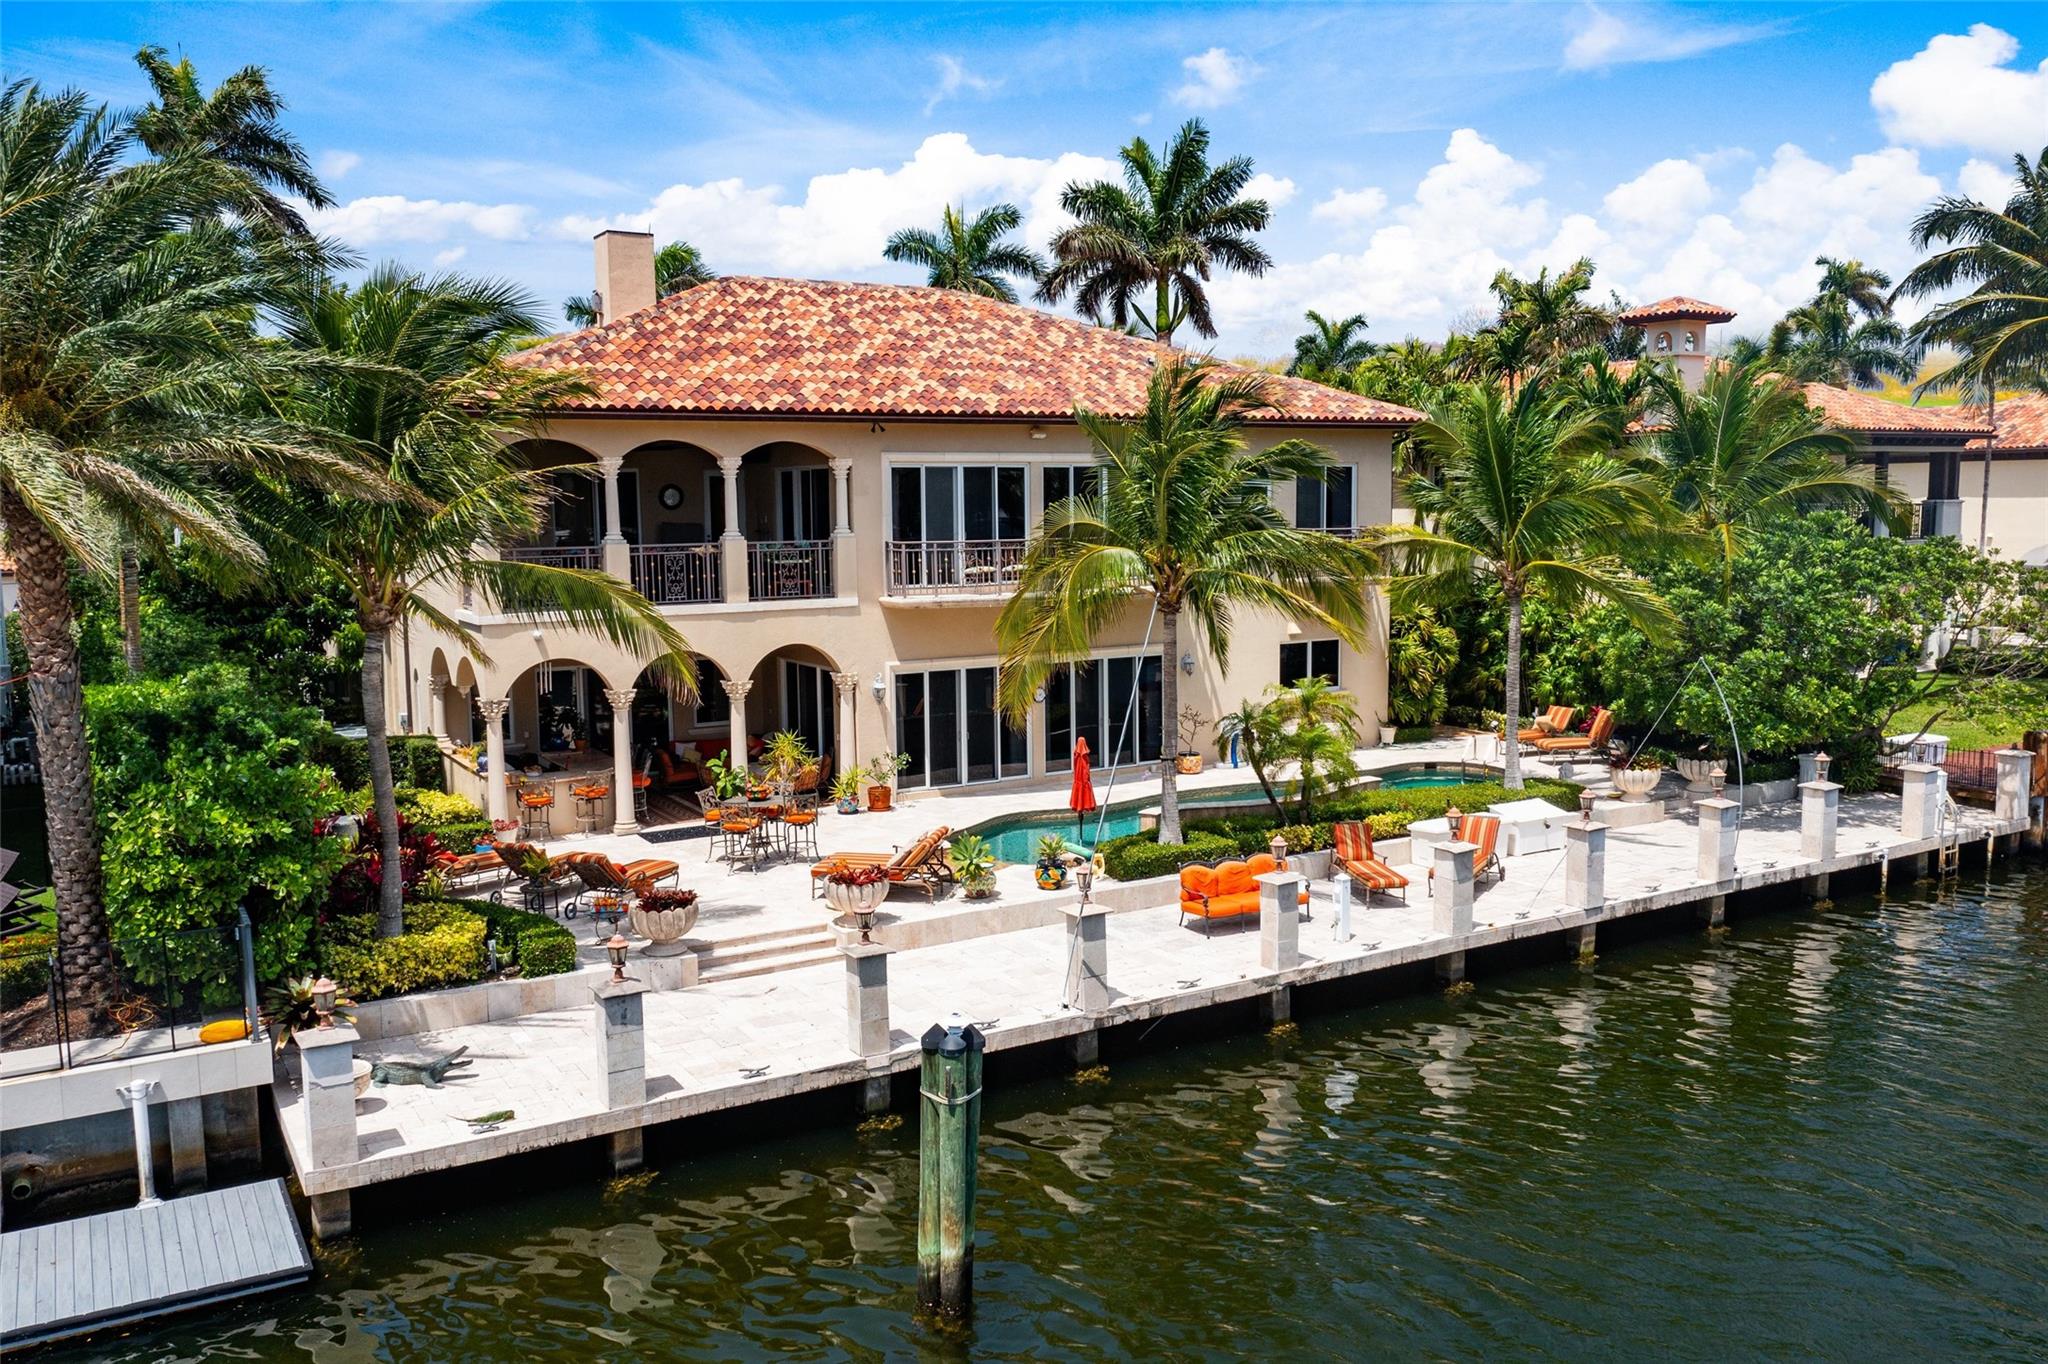 DESIRED SOUTH LAS OLAS WITH WIDE PANORAMAS OF SUNSET LAKE | NAT GAS GENERATOR | ELEVATOR | SAVANT LIGHT AUTOMATION | 2 CAR GARAGE | CONCRETE CONSTRUCTION | CONCRETE DOCK & 100 AMP SERVICE. GREAT RM: WRAP-AROUND BALCONY | BULLNOSE MARBLE & WROUGHT IRON STAIRCASE | ART NICHES | STONE FIREPLACE | LIGHTED TRAY CEILINGS | MARBLE FLOORS | CRYSTAL CHANDELIER | STAINED GLASS. MEDIA PARLOR: ONXY TOPS & WET BAR & ICEMAKER & MAHOGANY PANELING. LANAI: WET BAR SUMMER KITCHEN & DINING AREA & MOUNTED MEDIA. KITCHEN: NEFF KITCHEN & BURL WOOD CABINETRY, VIKING STOVE & RANGE. BUTLER PANTRY: 4TH DISHWASHER & 2ND FRIDGE & FREEZER & ICEMAKER. PRIMARY BR: COVERED TERRACE WITH SEATING & MOUNTED TV, WET BAR, STEAM SHOWER, ETCHED GLASS, ISLAND CLOSET & DRESSING RM. 15-MINUTES VIA BOAT TO INLET. 5 MINUTES TO BEACH